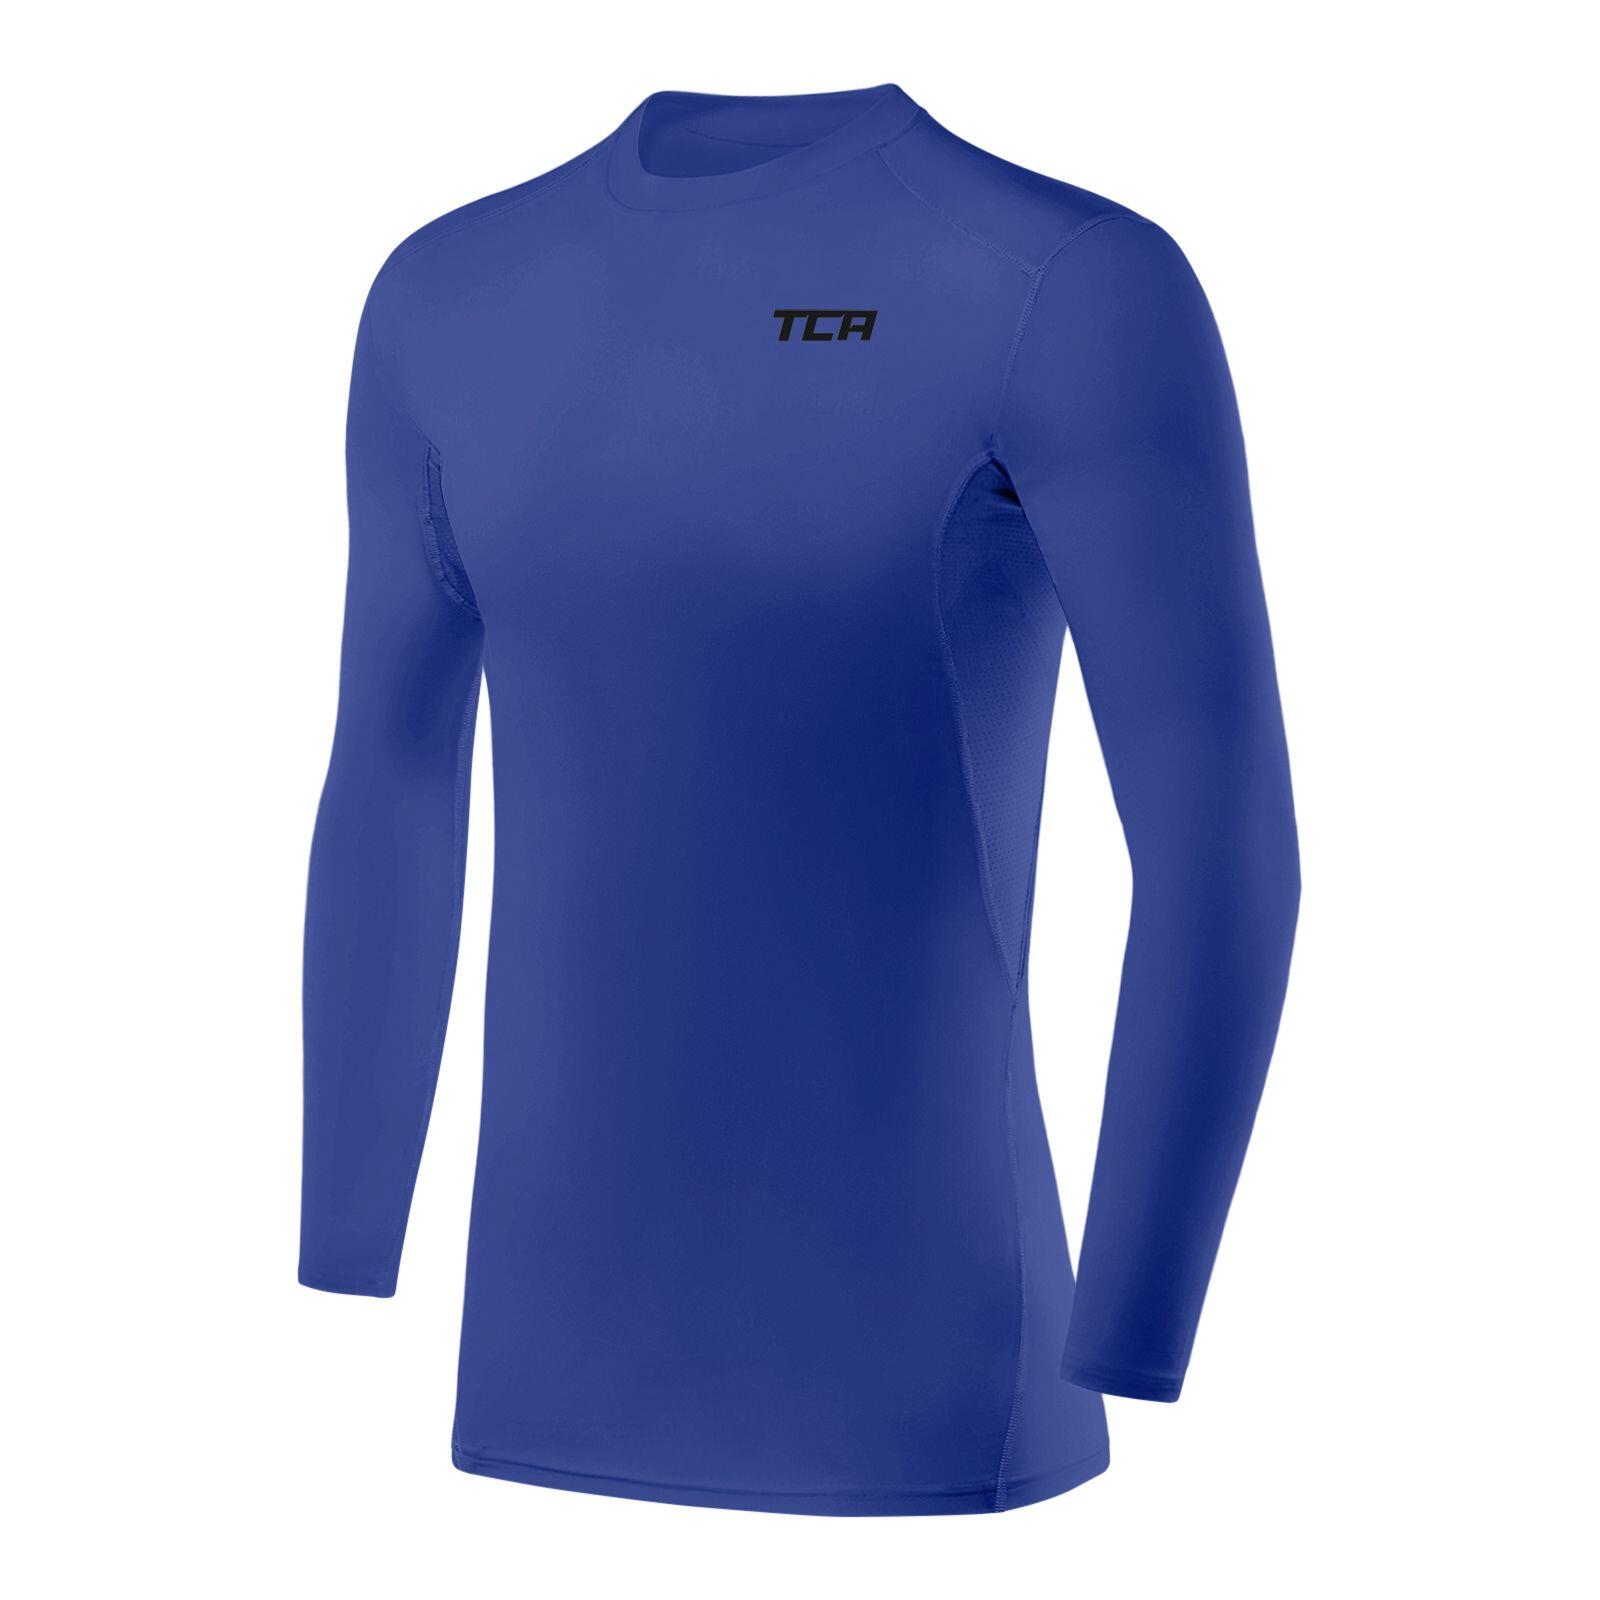 TCA Boys' HyperFusion Breathable Base Layer Compression Top - Dazzling Blue